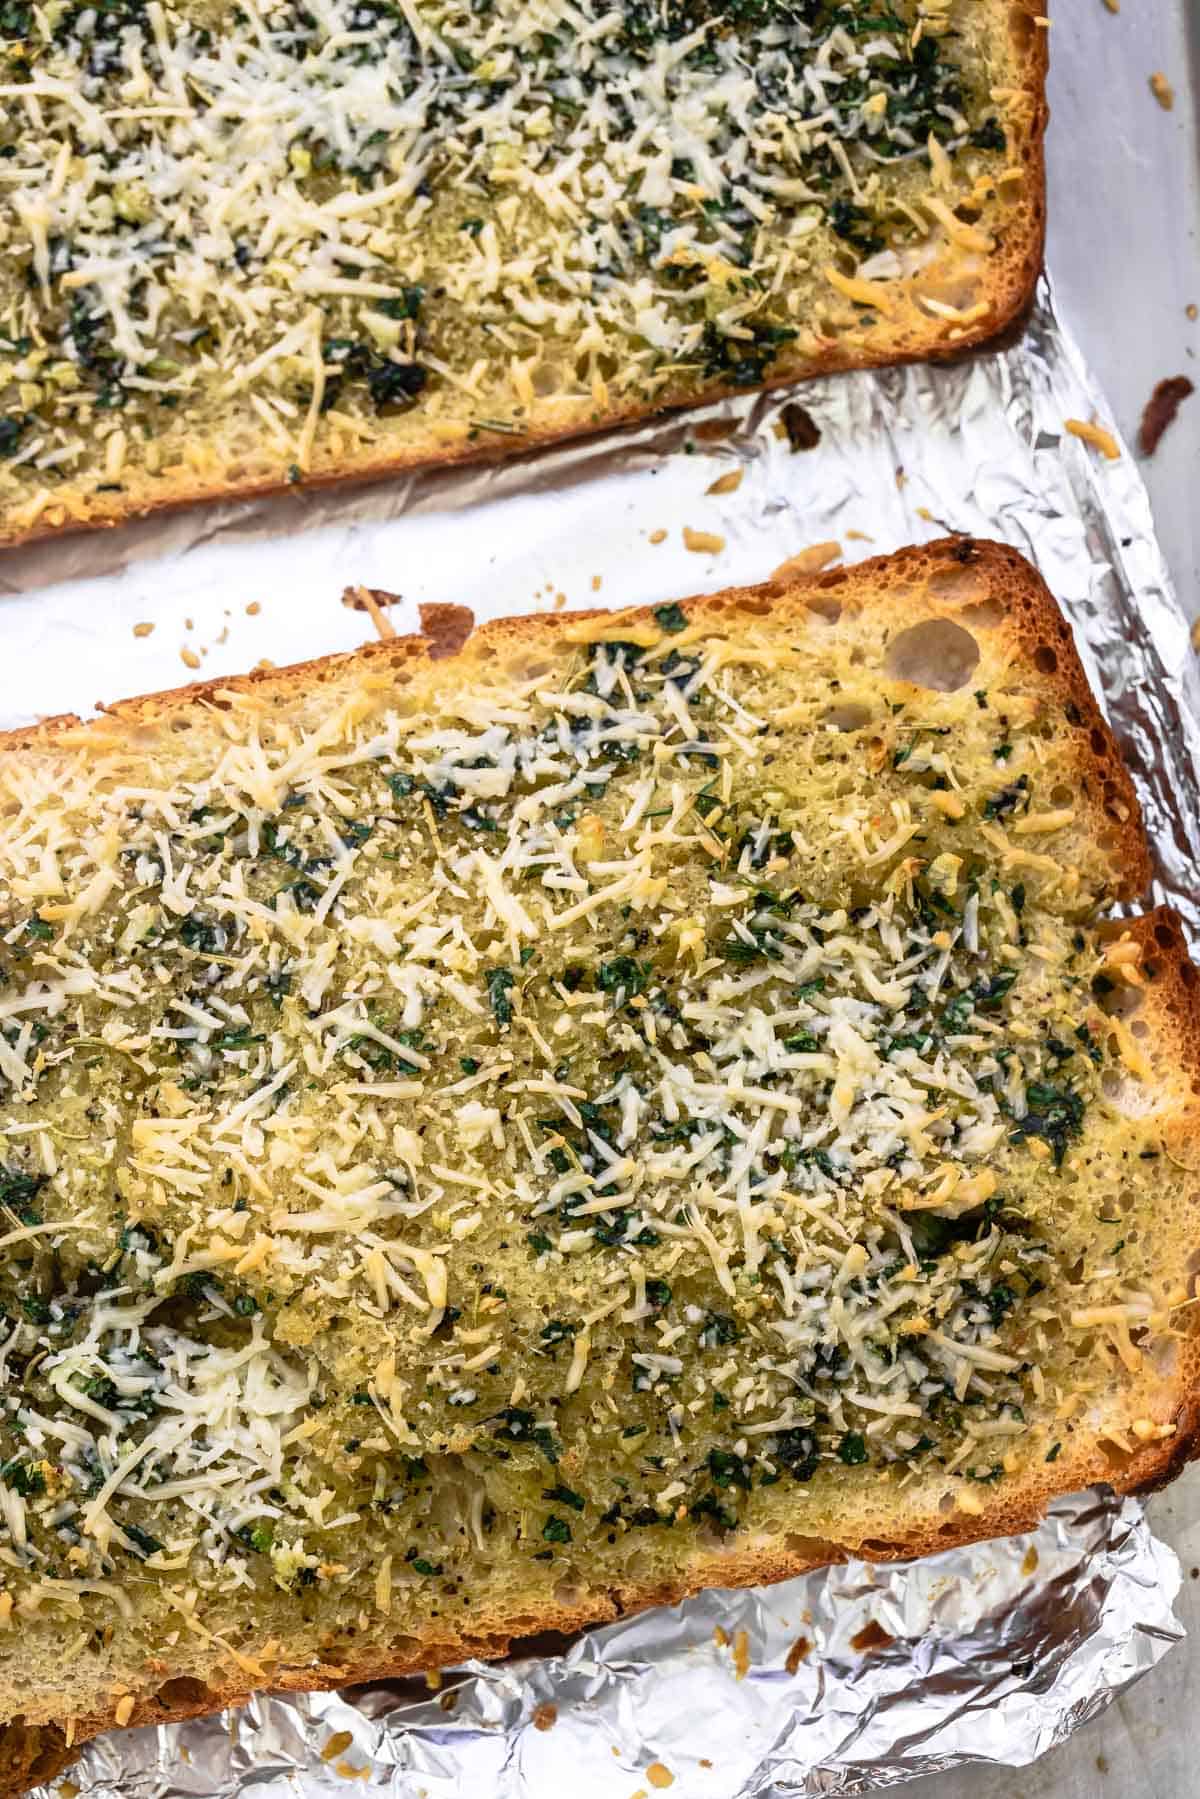 garlic bread on a foil-covered sheet pan